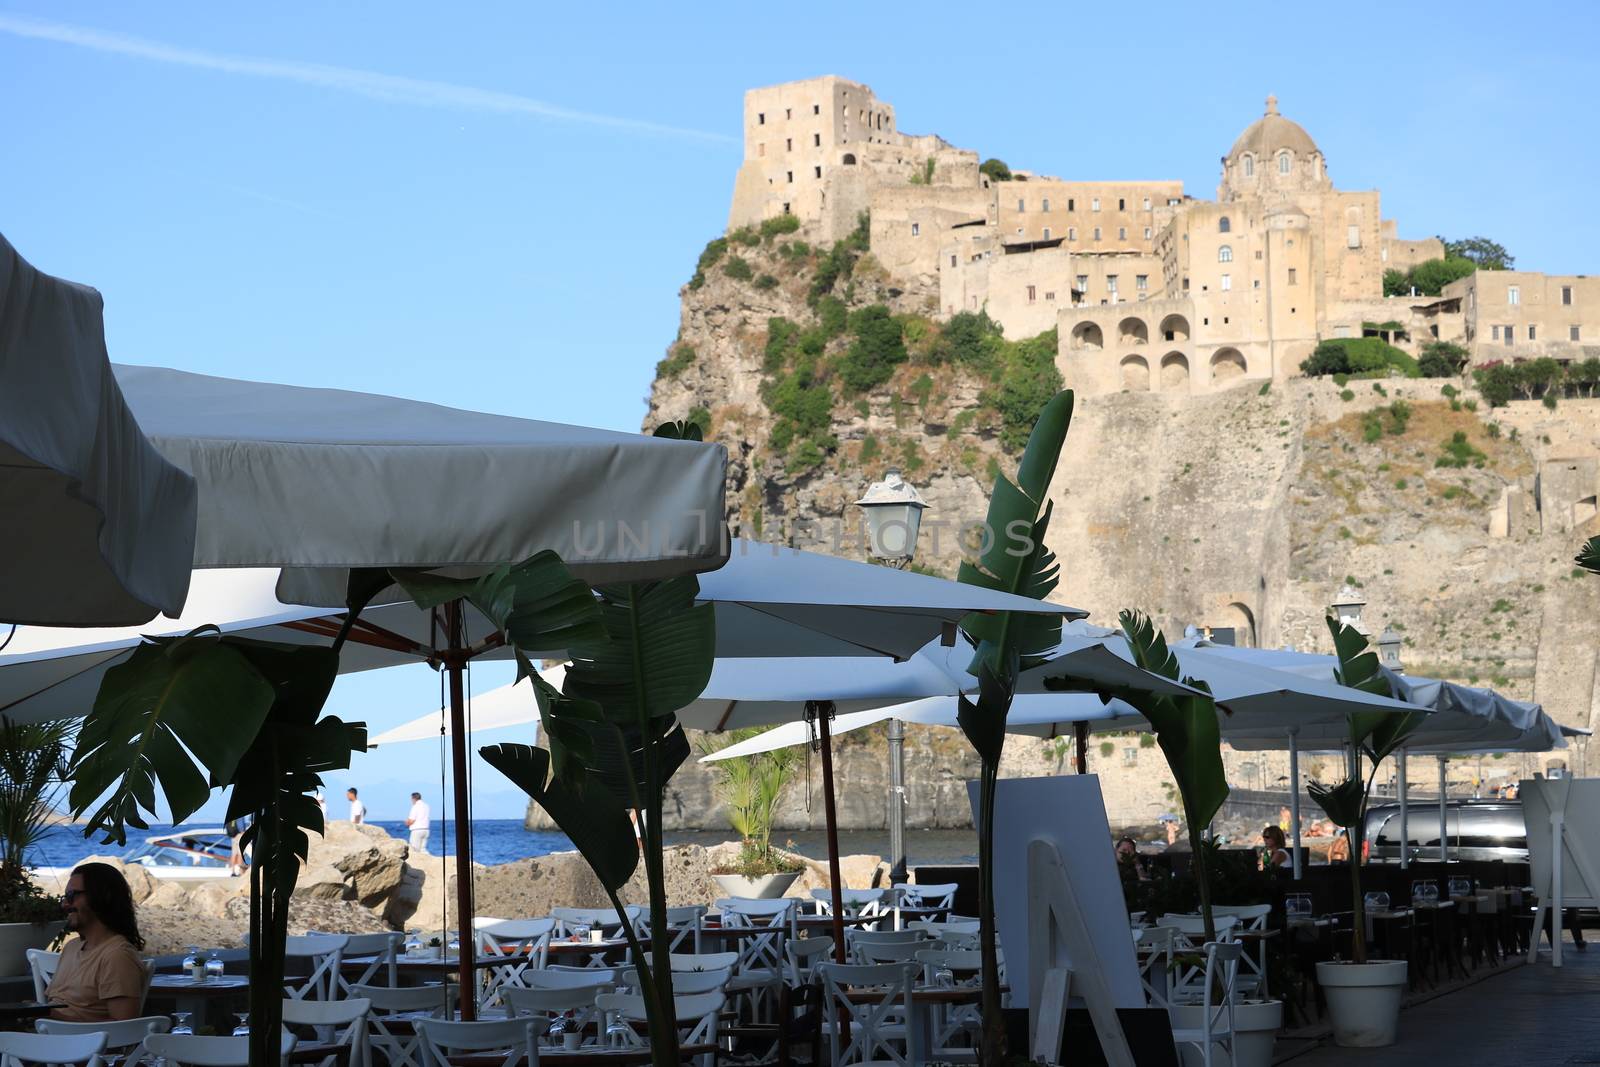 Ischia, Naples, Italy, About the July 2019. Umbrellas and tables of a romantic seaside restaurant. In the background the Aragonese Castle of Ischia.